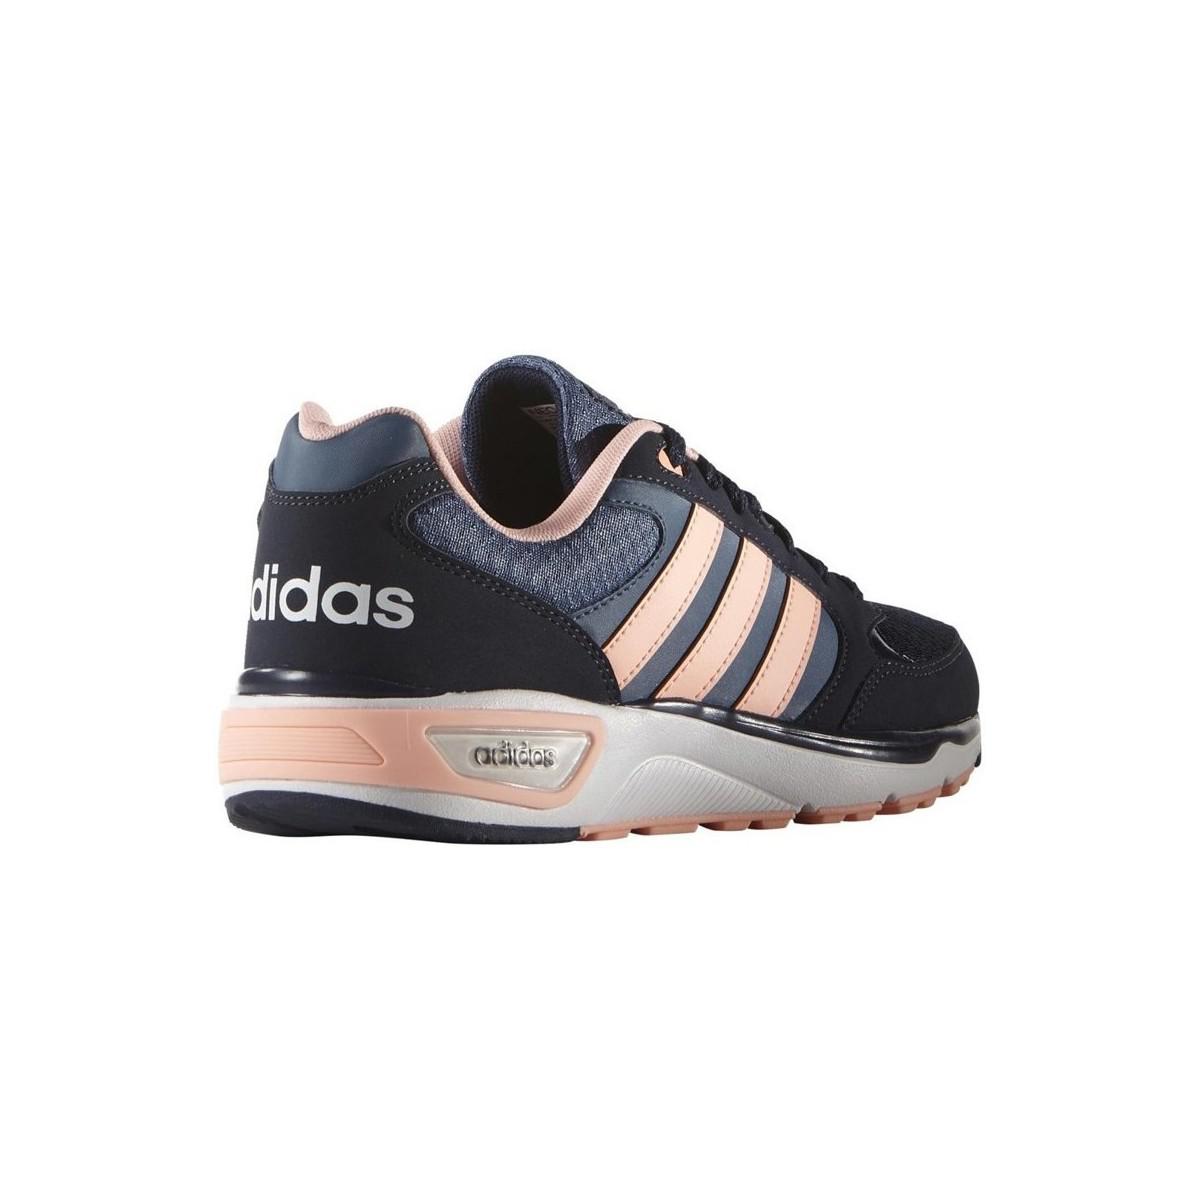 adidas cloudfoam 8tis womens trainers